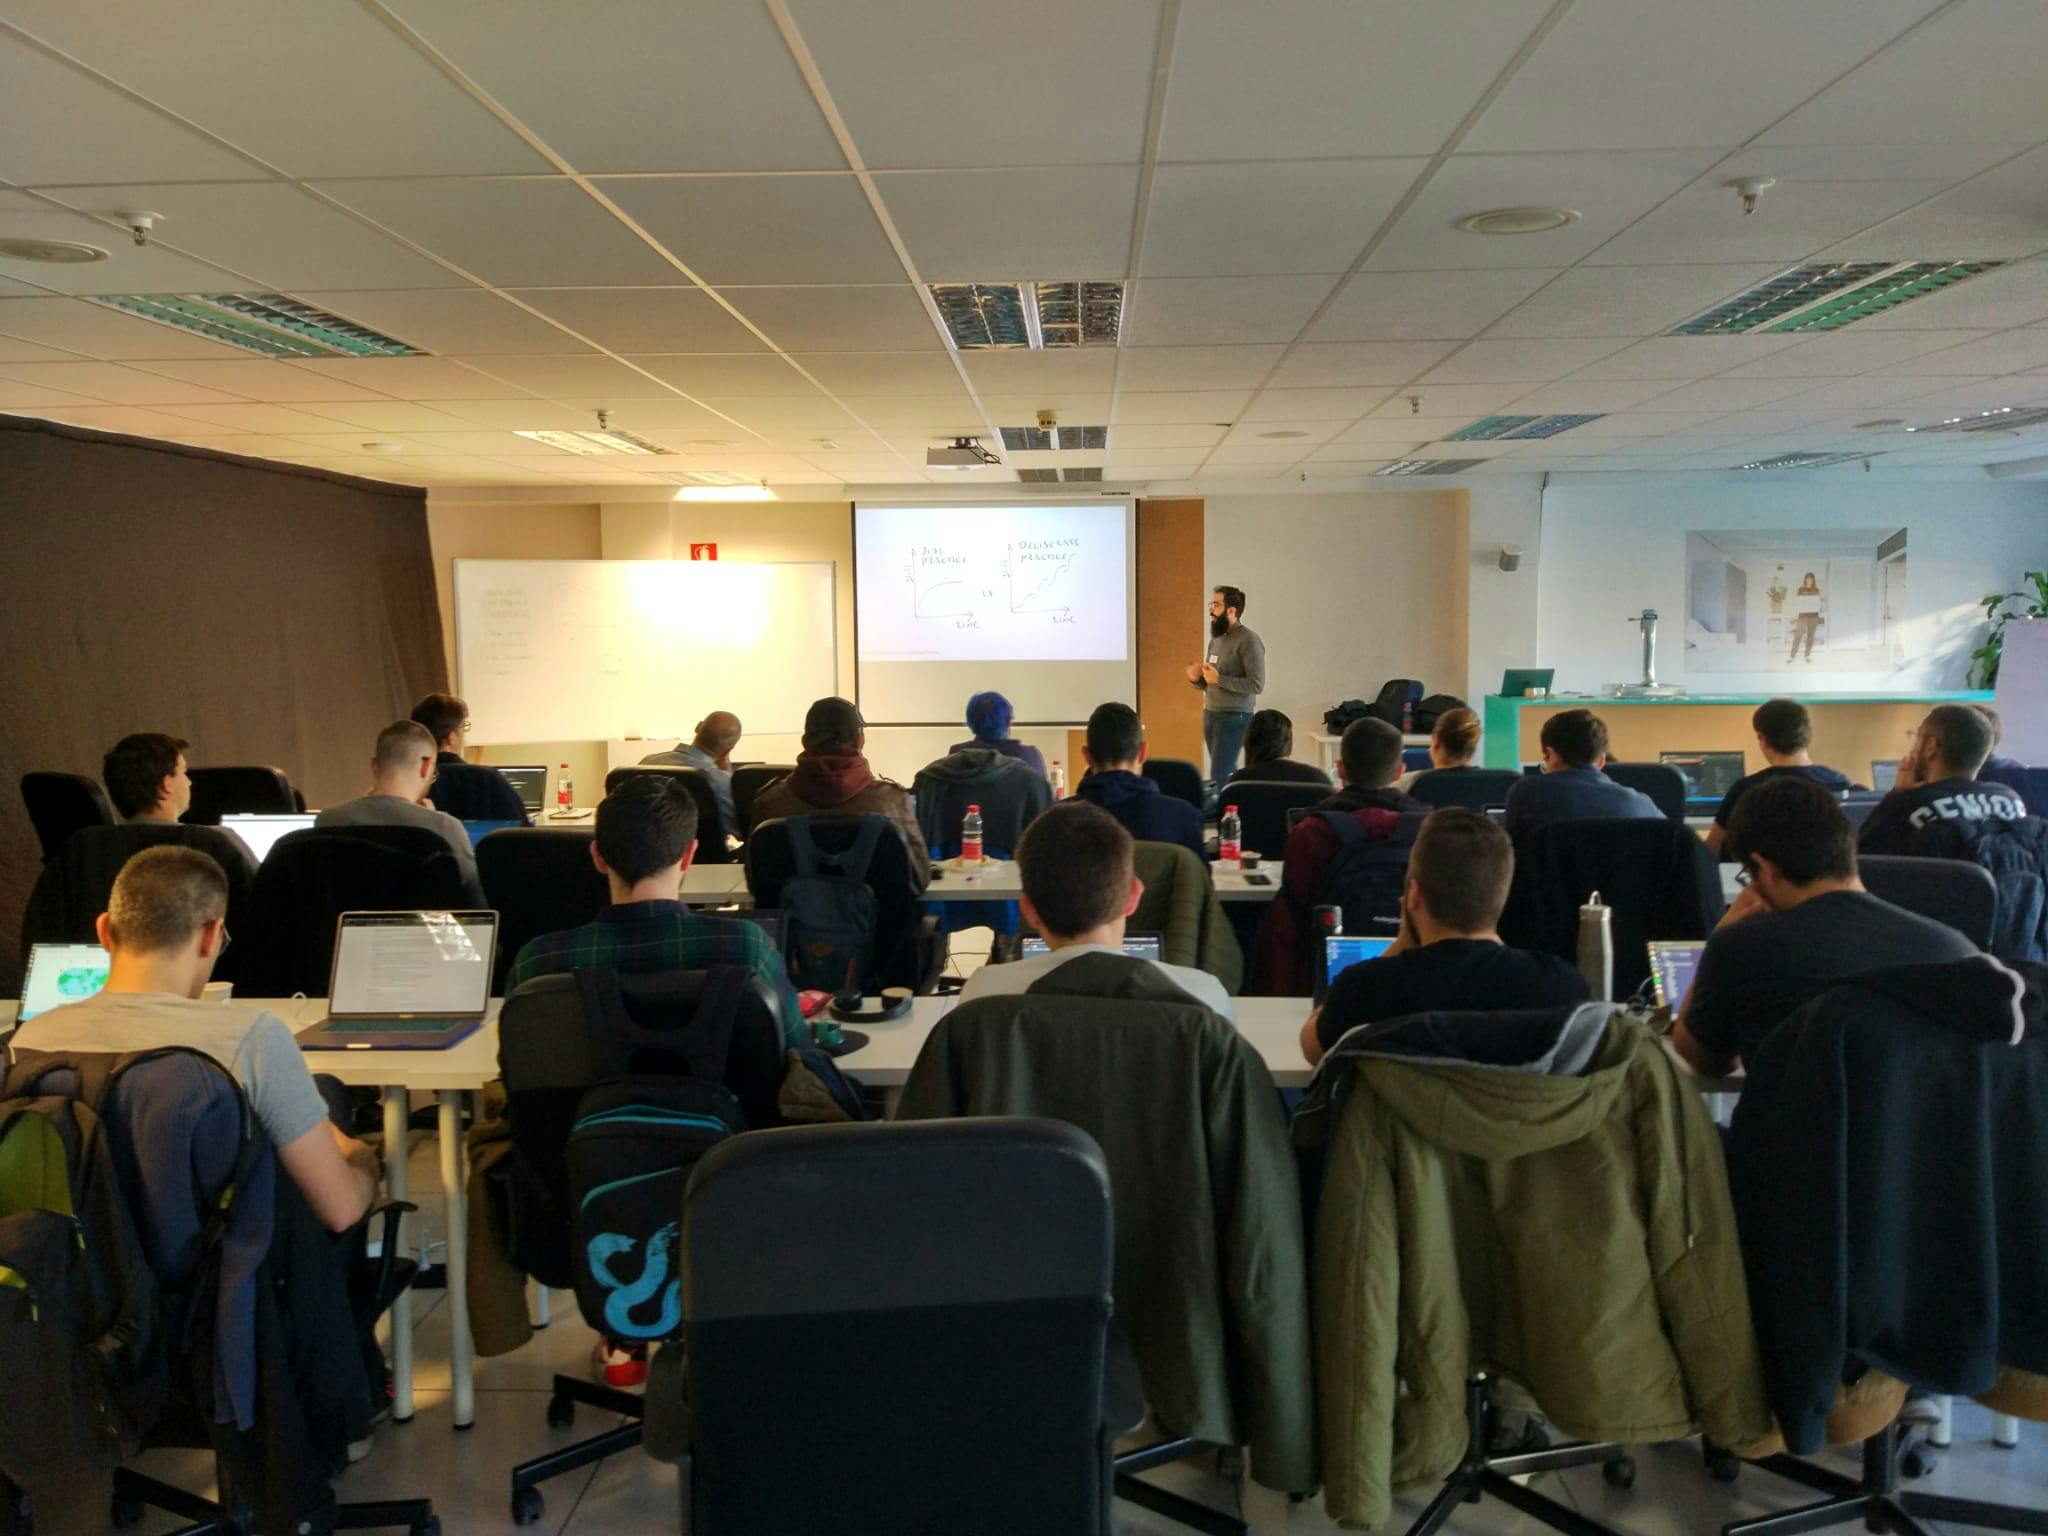 Sergio talking about TDD and software development best practices at Spotahome offices in Madrid (2019).